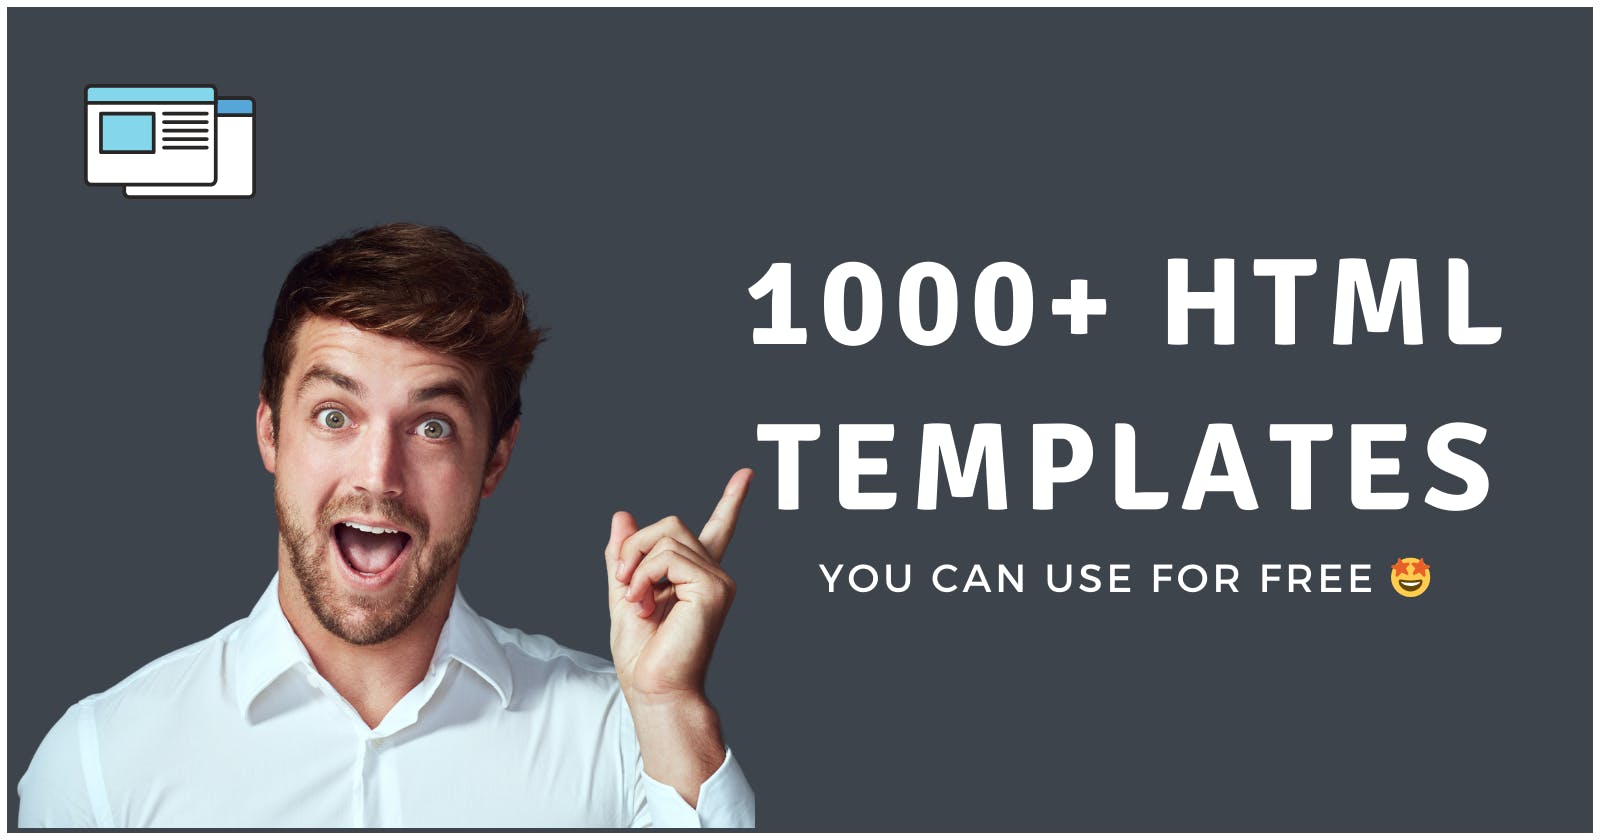 1000+ HTML templates you can use for FREE 🤩